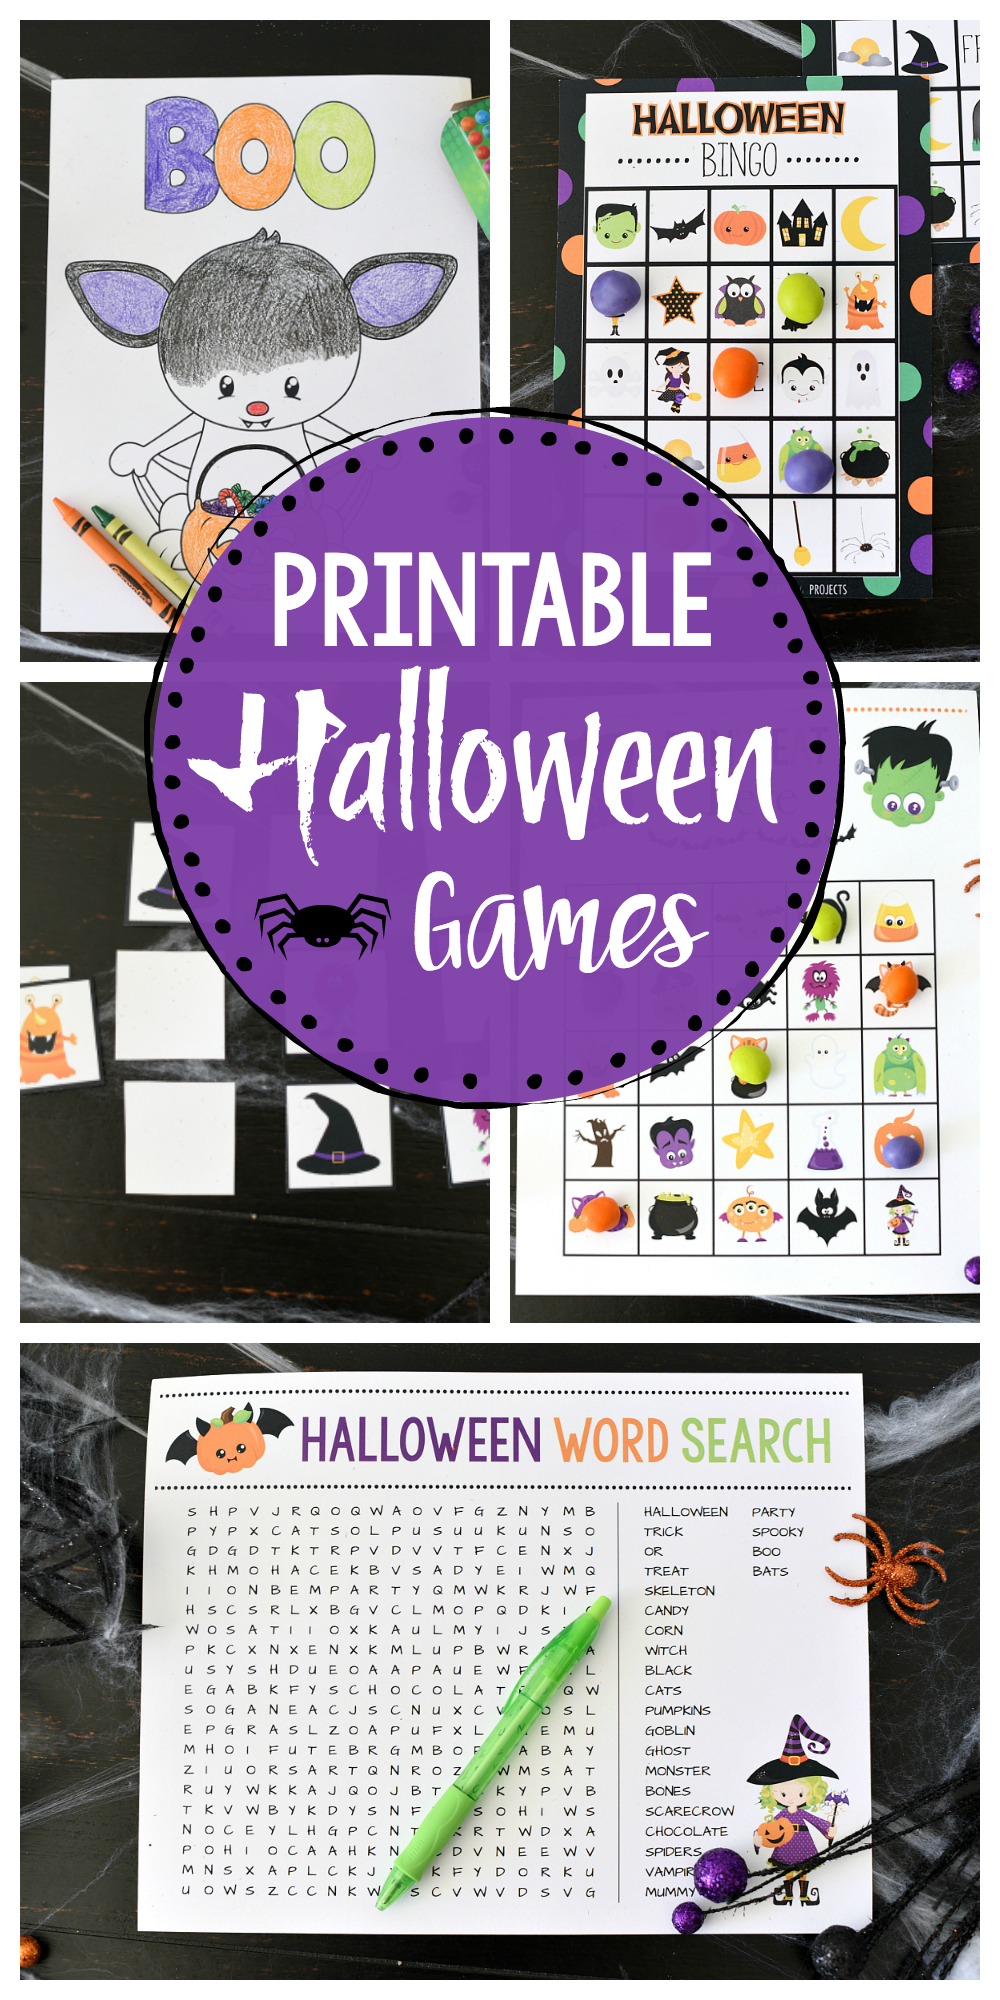 Cute Printable Halloween Games for Kids to play at Halloween parties! Don't Eat Pete, Halloween Bingo, Halloween Word Search, Memory and Coloring Pages #Halloween #kids #games #Halloweenparty